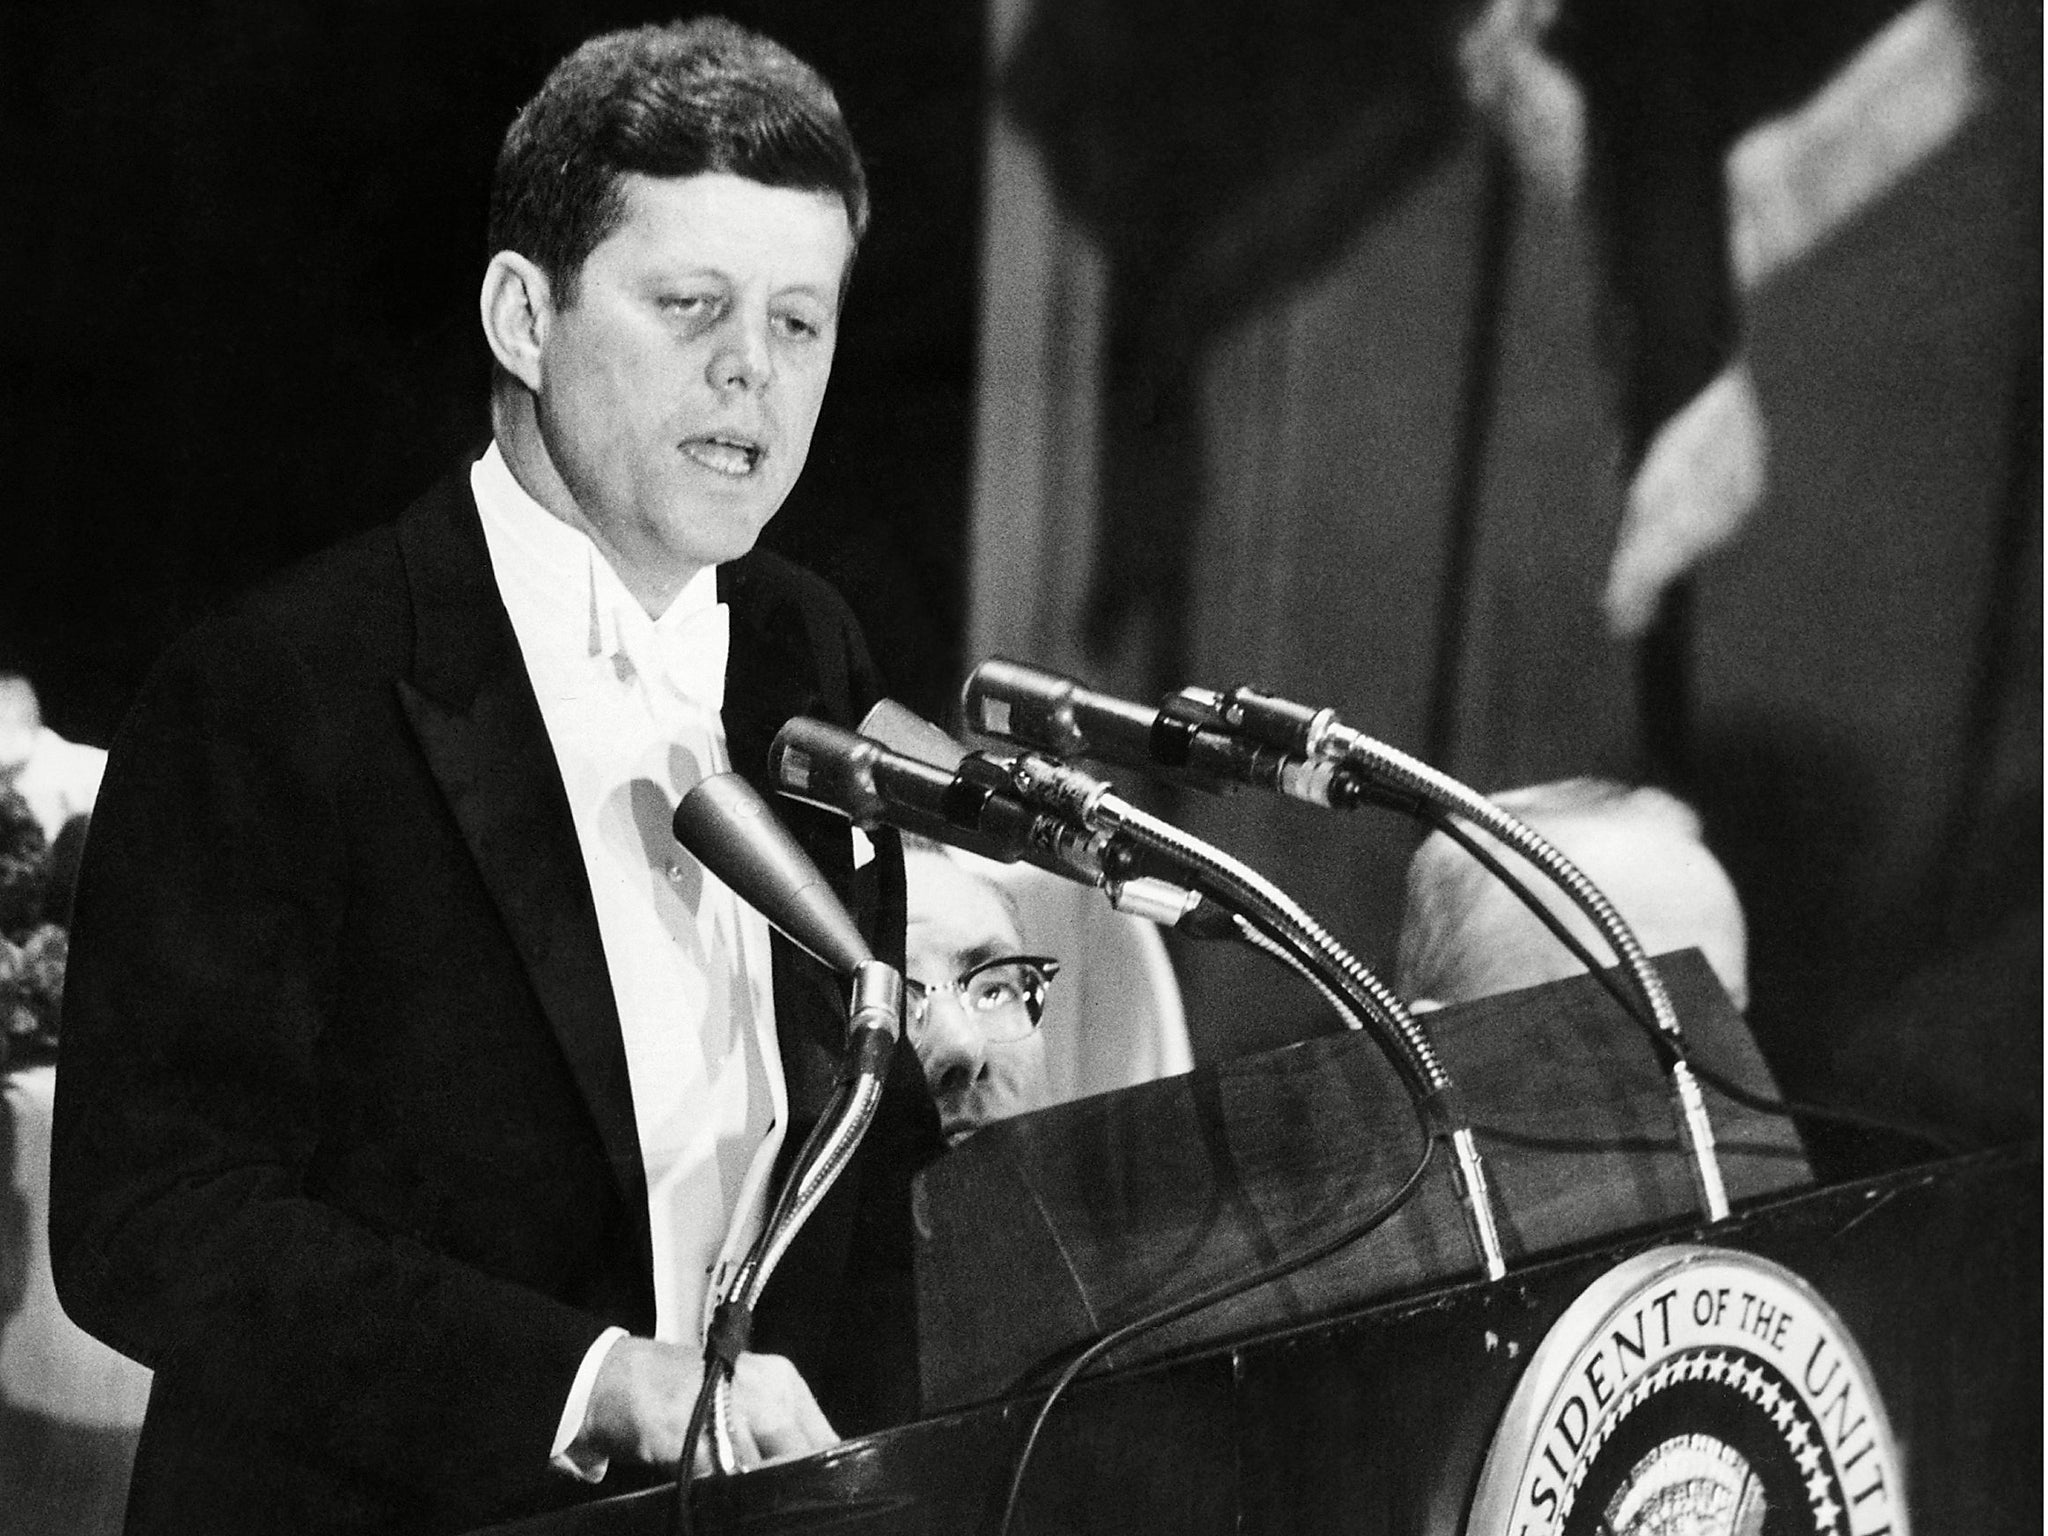 President John Kennedy urges self censorship of news, days after the failed Bay of Pigs invasion of Cuba